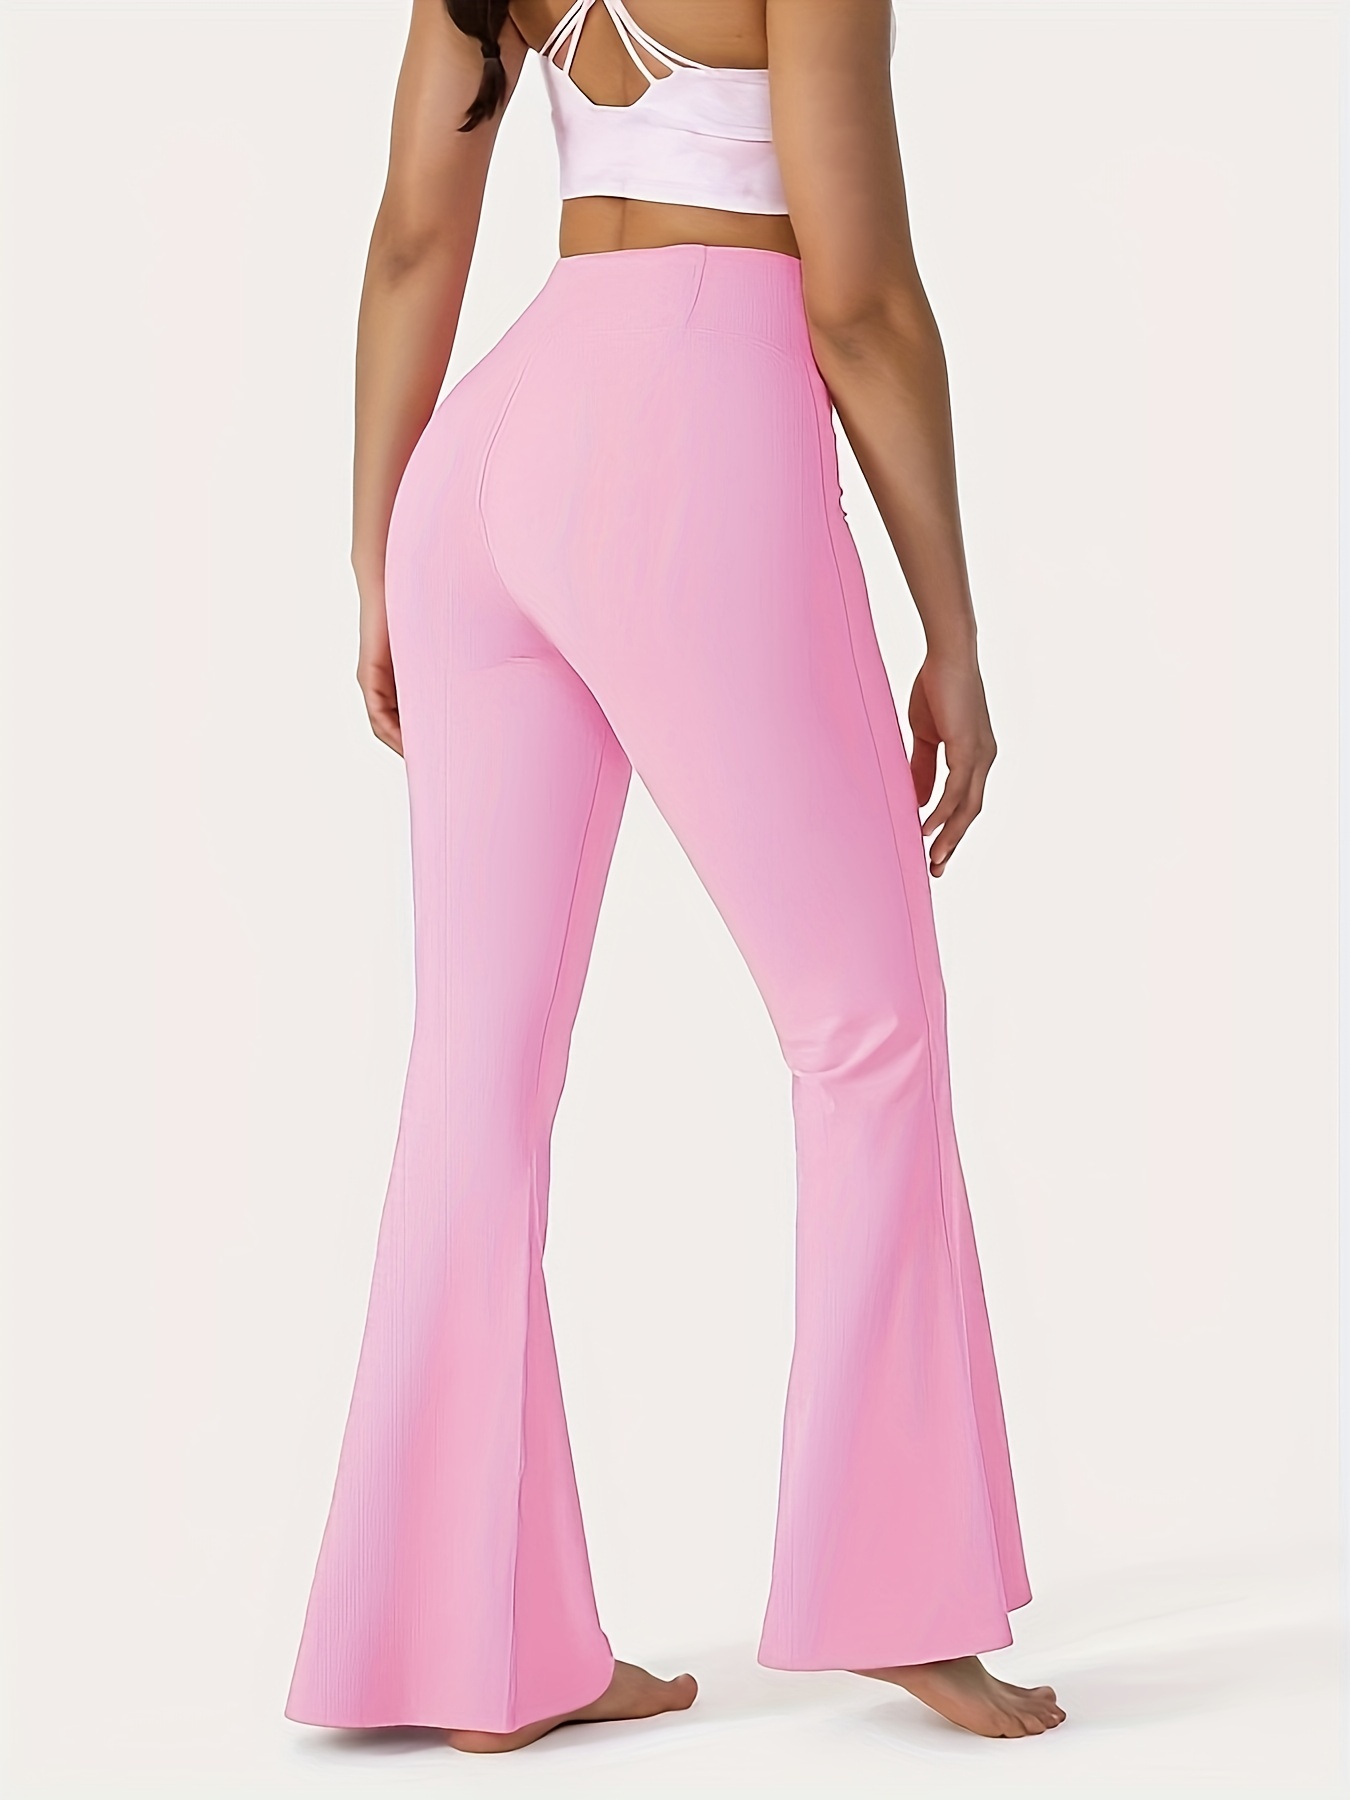 Pink Flare Yoga Pants for Women, V Crossover High Waisted Flare Workout  Pants 